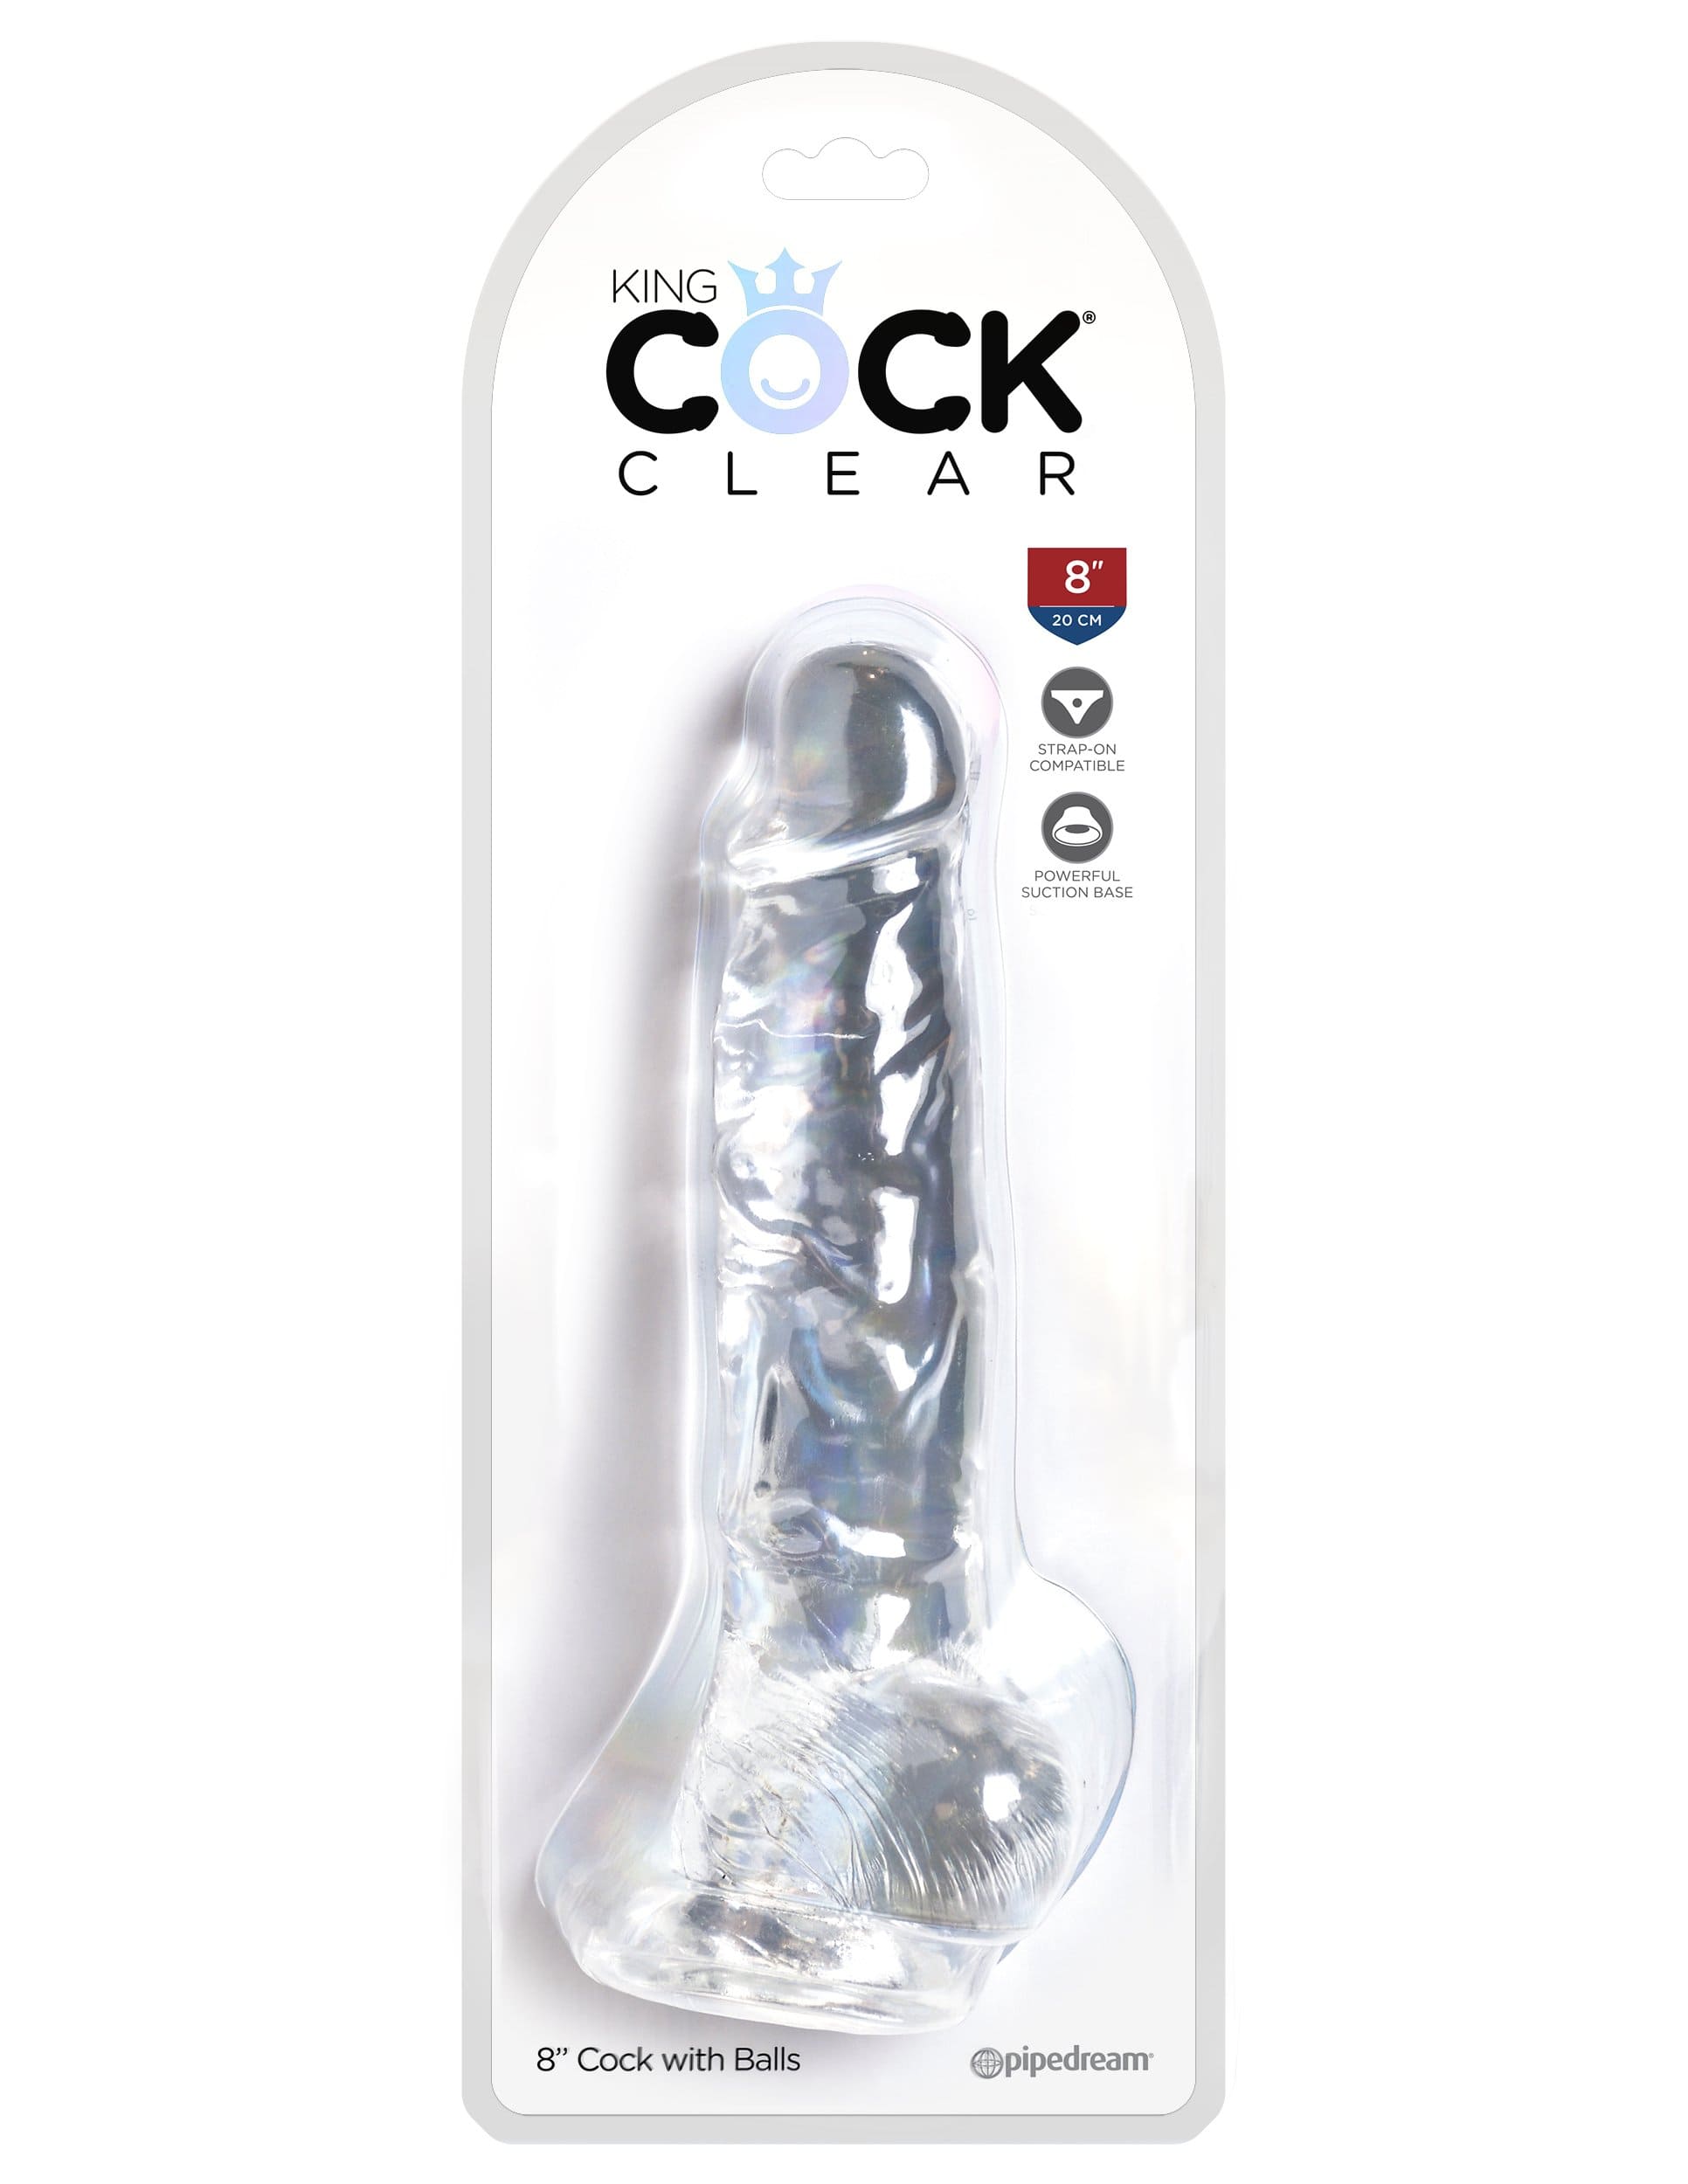 king cock clear 8 cock with balls